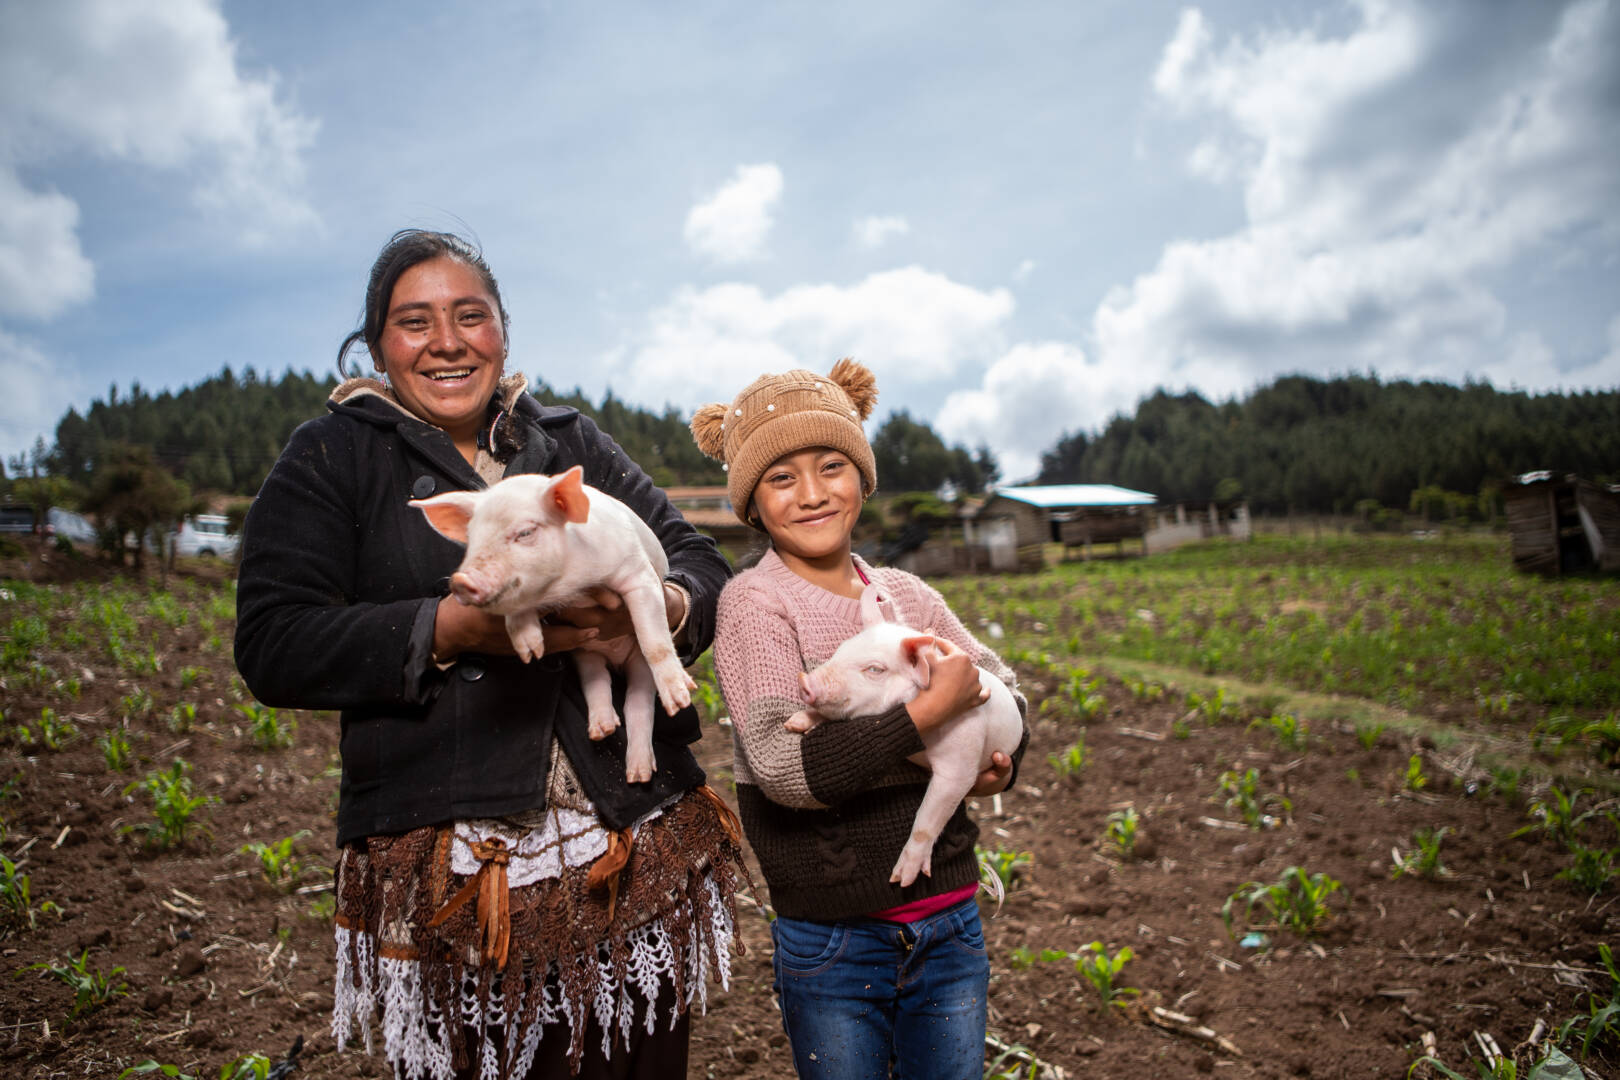 A smiling woman and young girl hold piglets in a field.